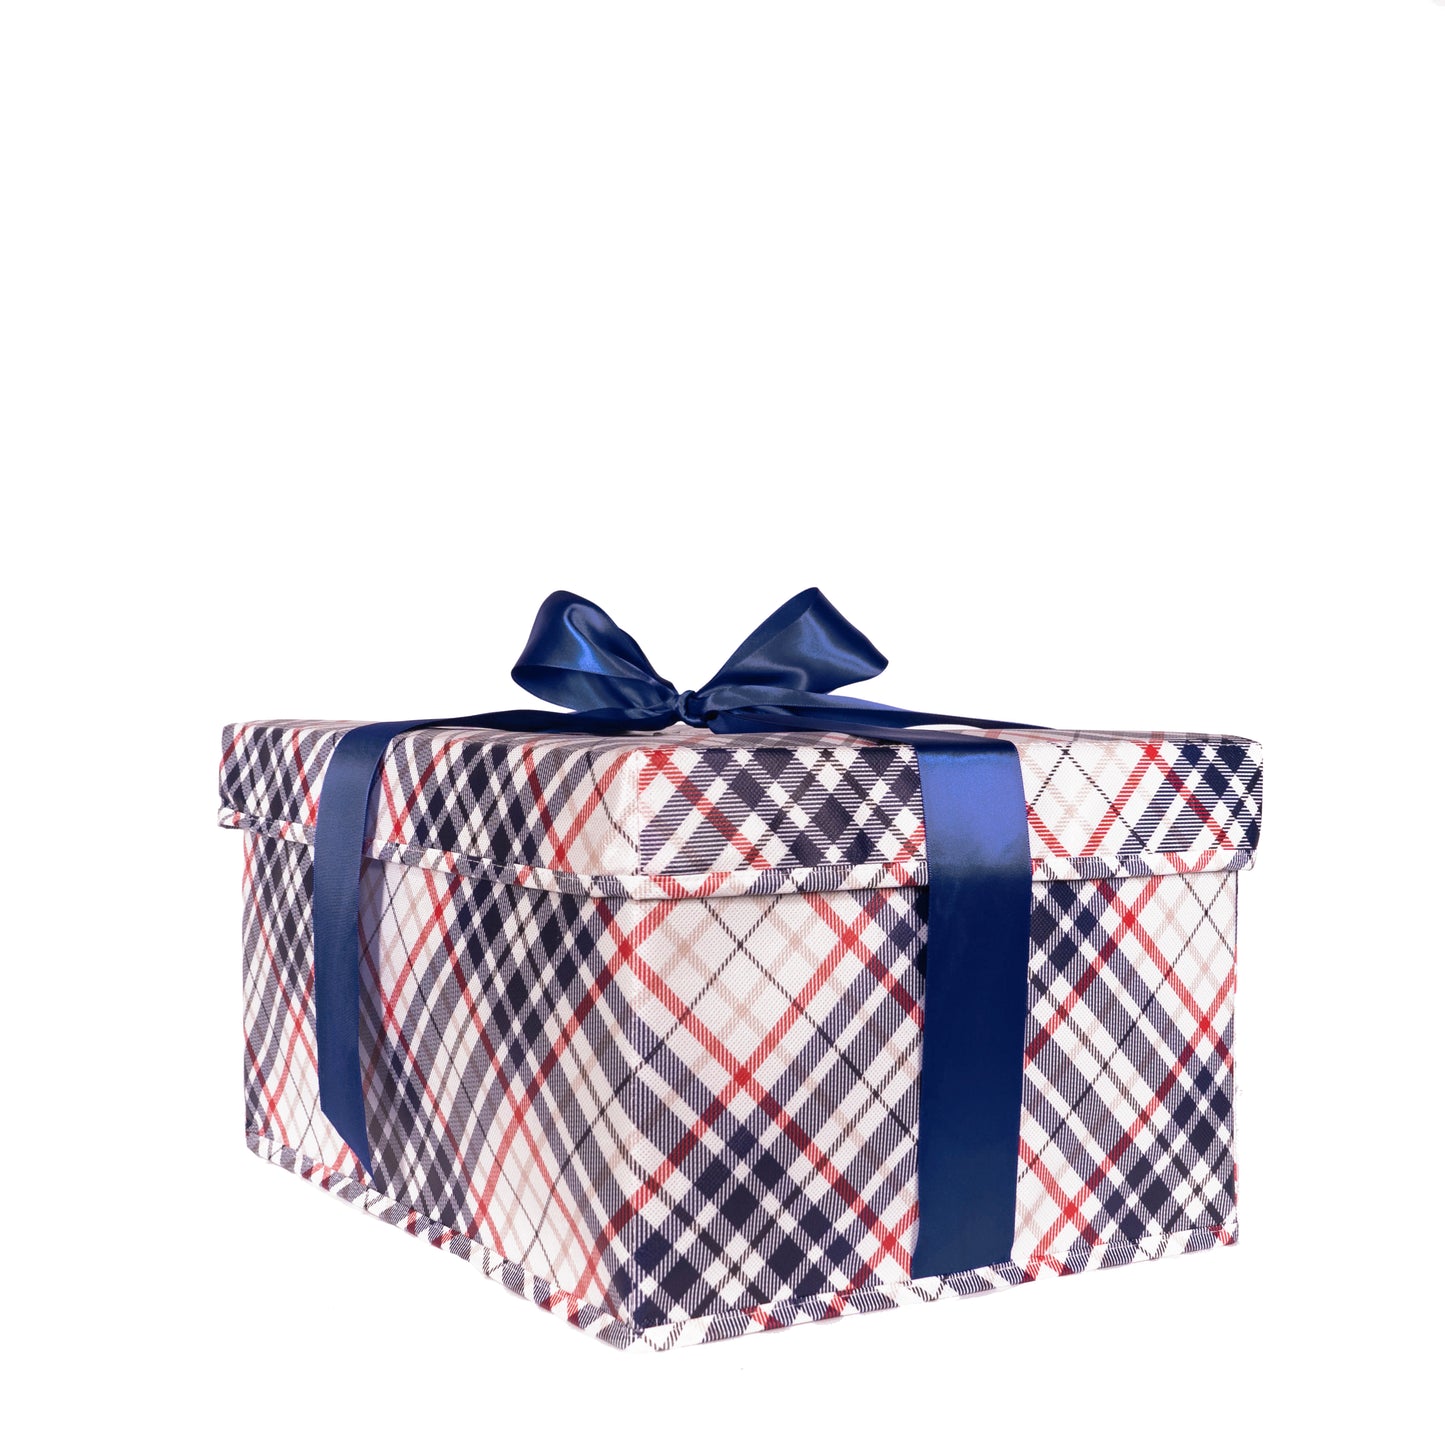 Medium blue and red plaid collapsible gift box with satin ribbon attached, great zero waste solution for sustainable and eco-friendly gift boxes - EverWrap